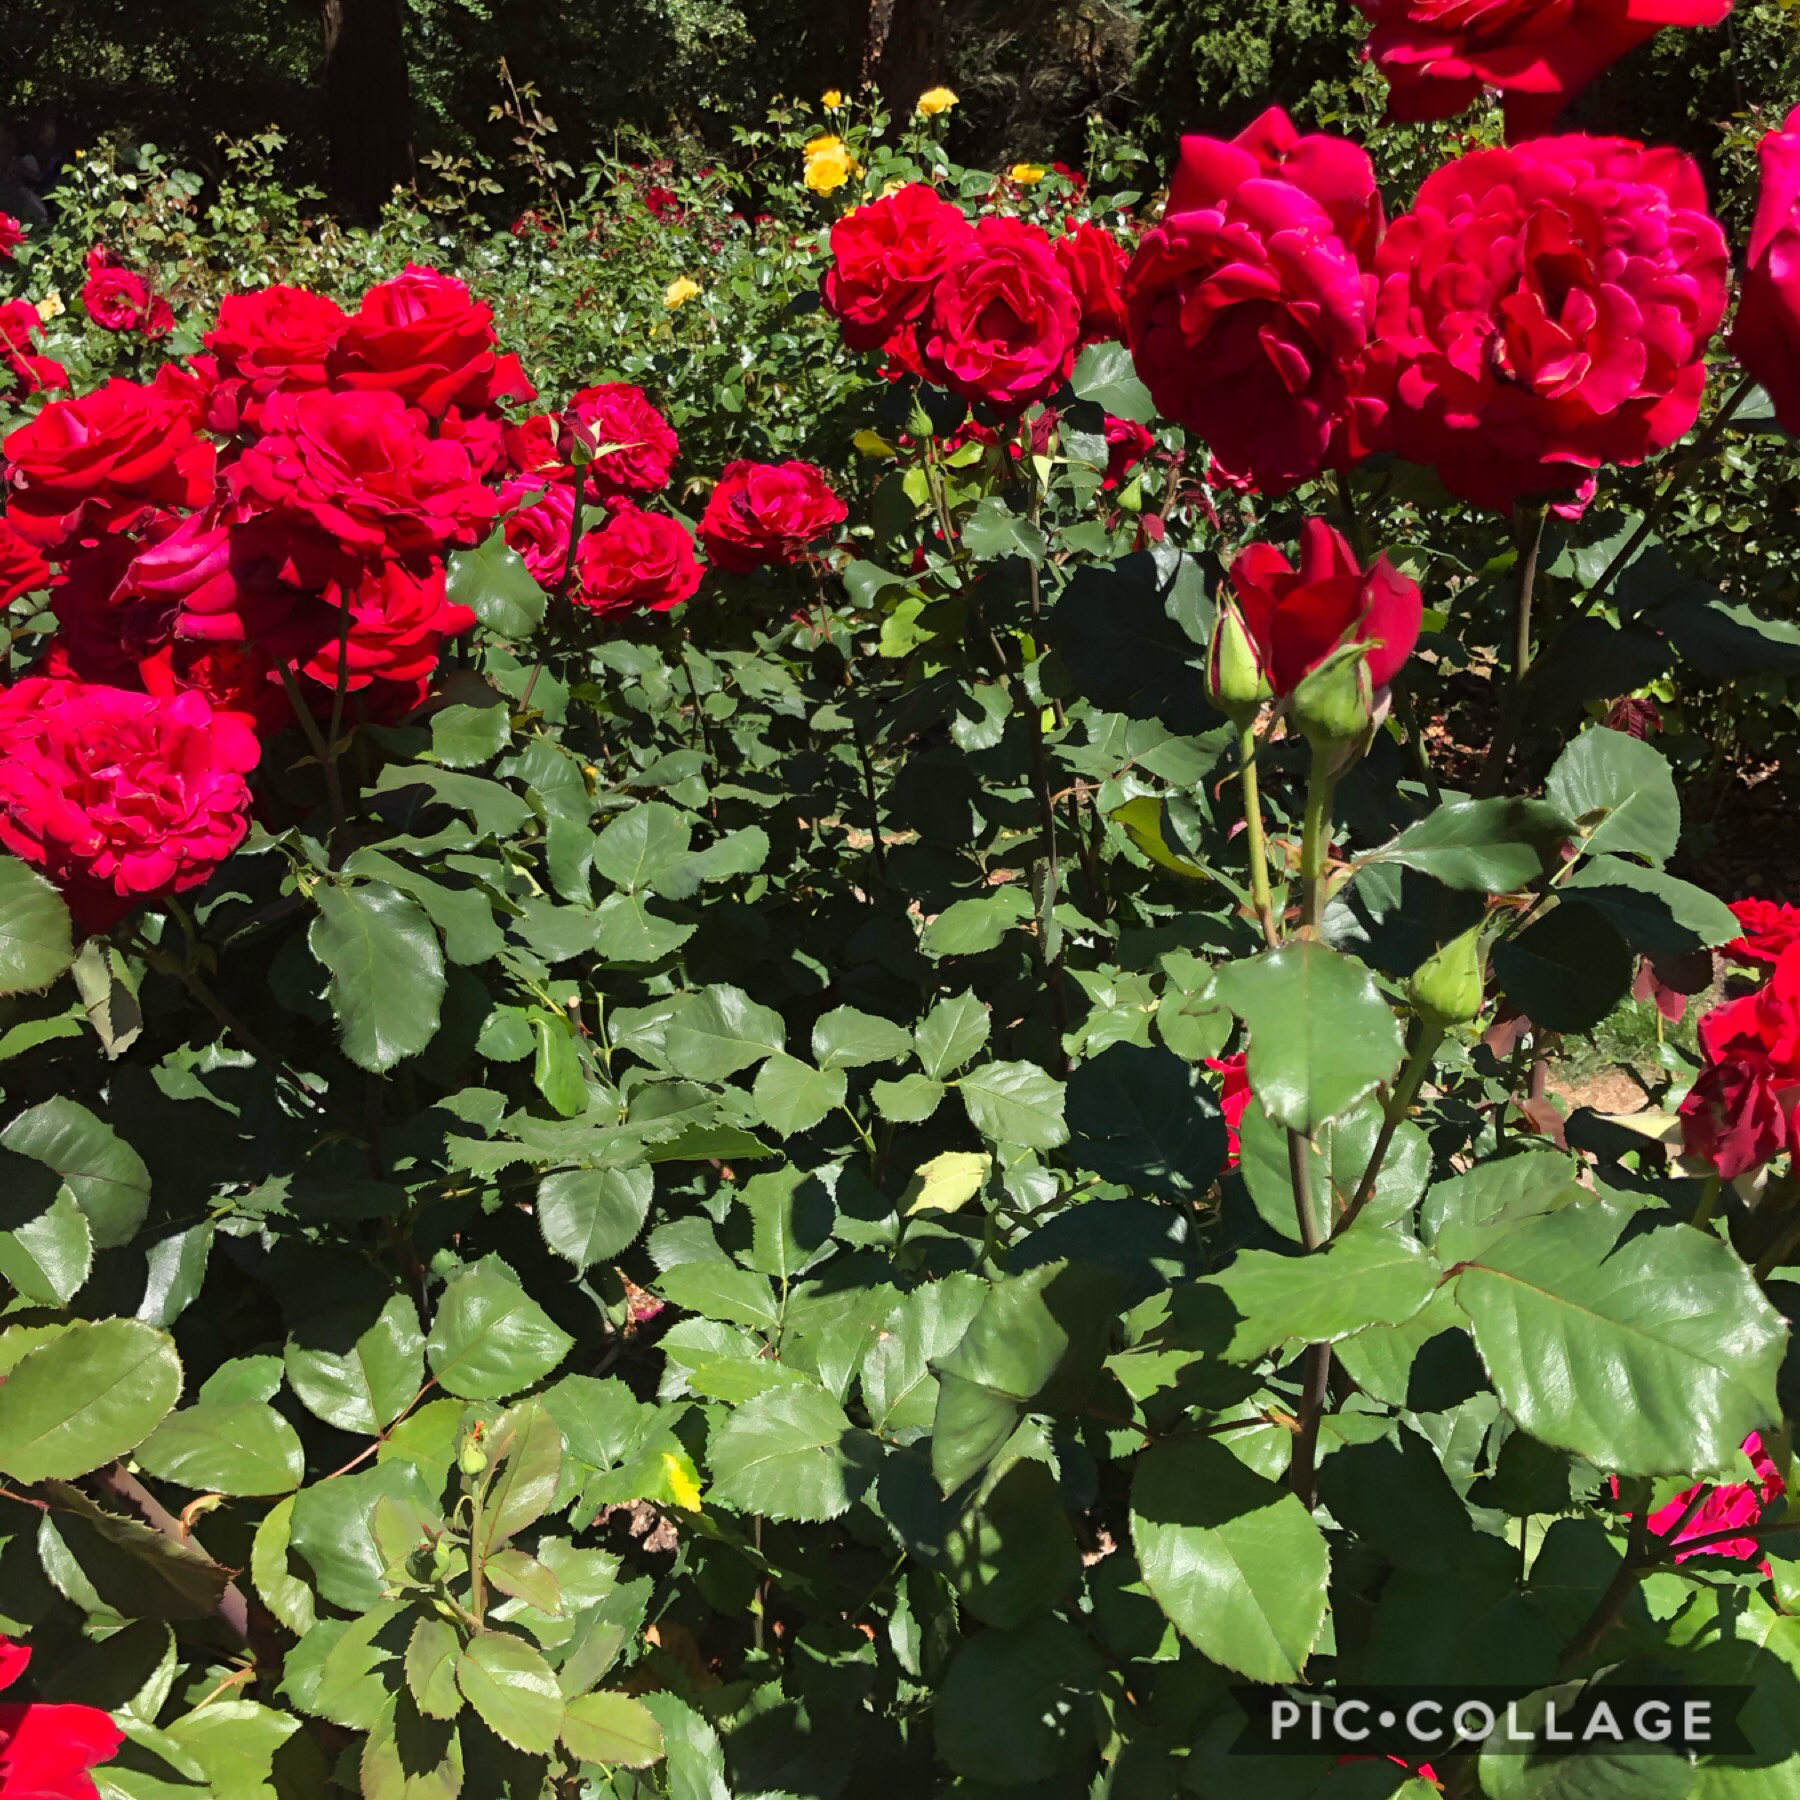 🌈🌈hey ppl I’m back lol, I havnt been on here for months and I feel vv sad to not go on this app bc I feel emotionally attached to it bc I’ve had it for so long. I went on a road trip and here’s a pic of roses I took, anyways I’m more active on insta so if